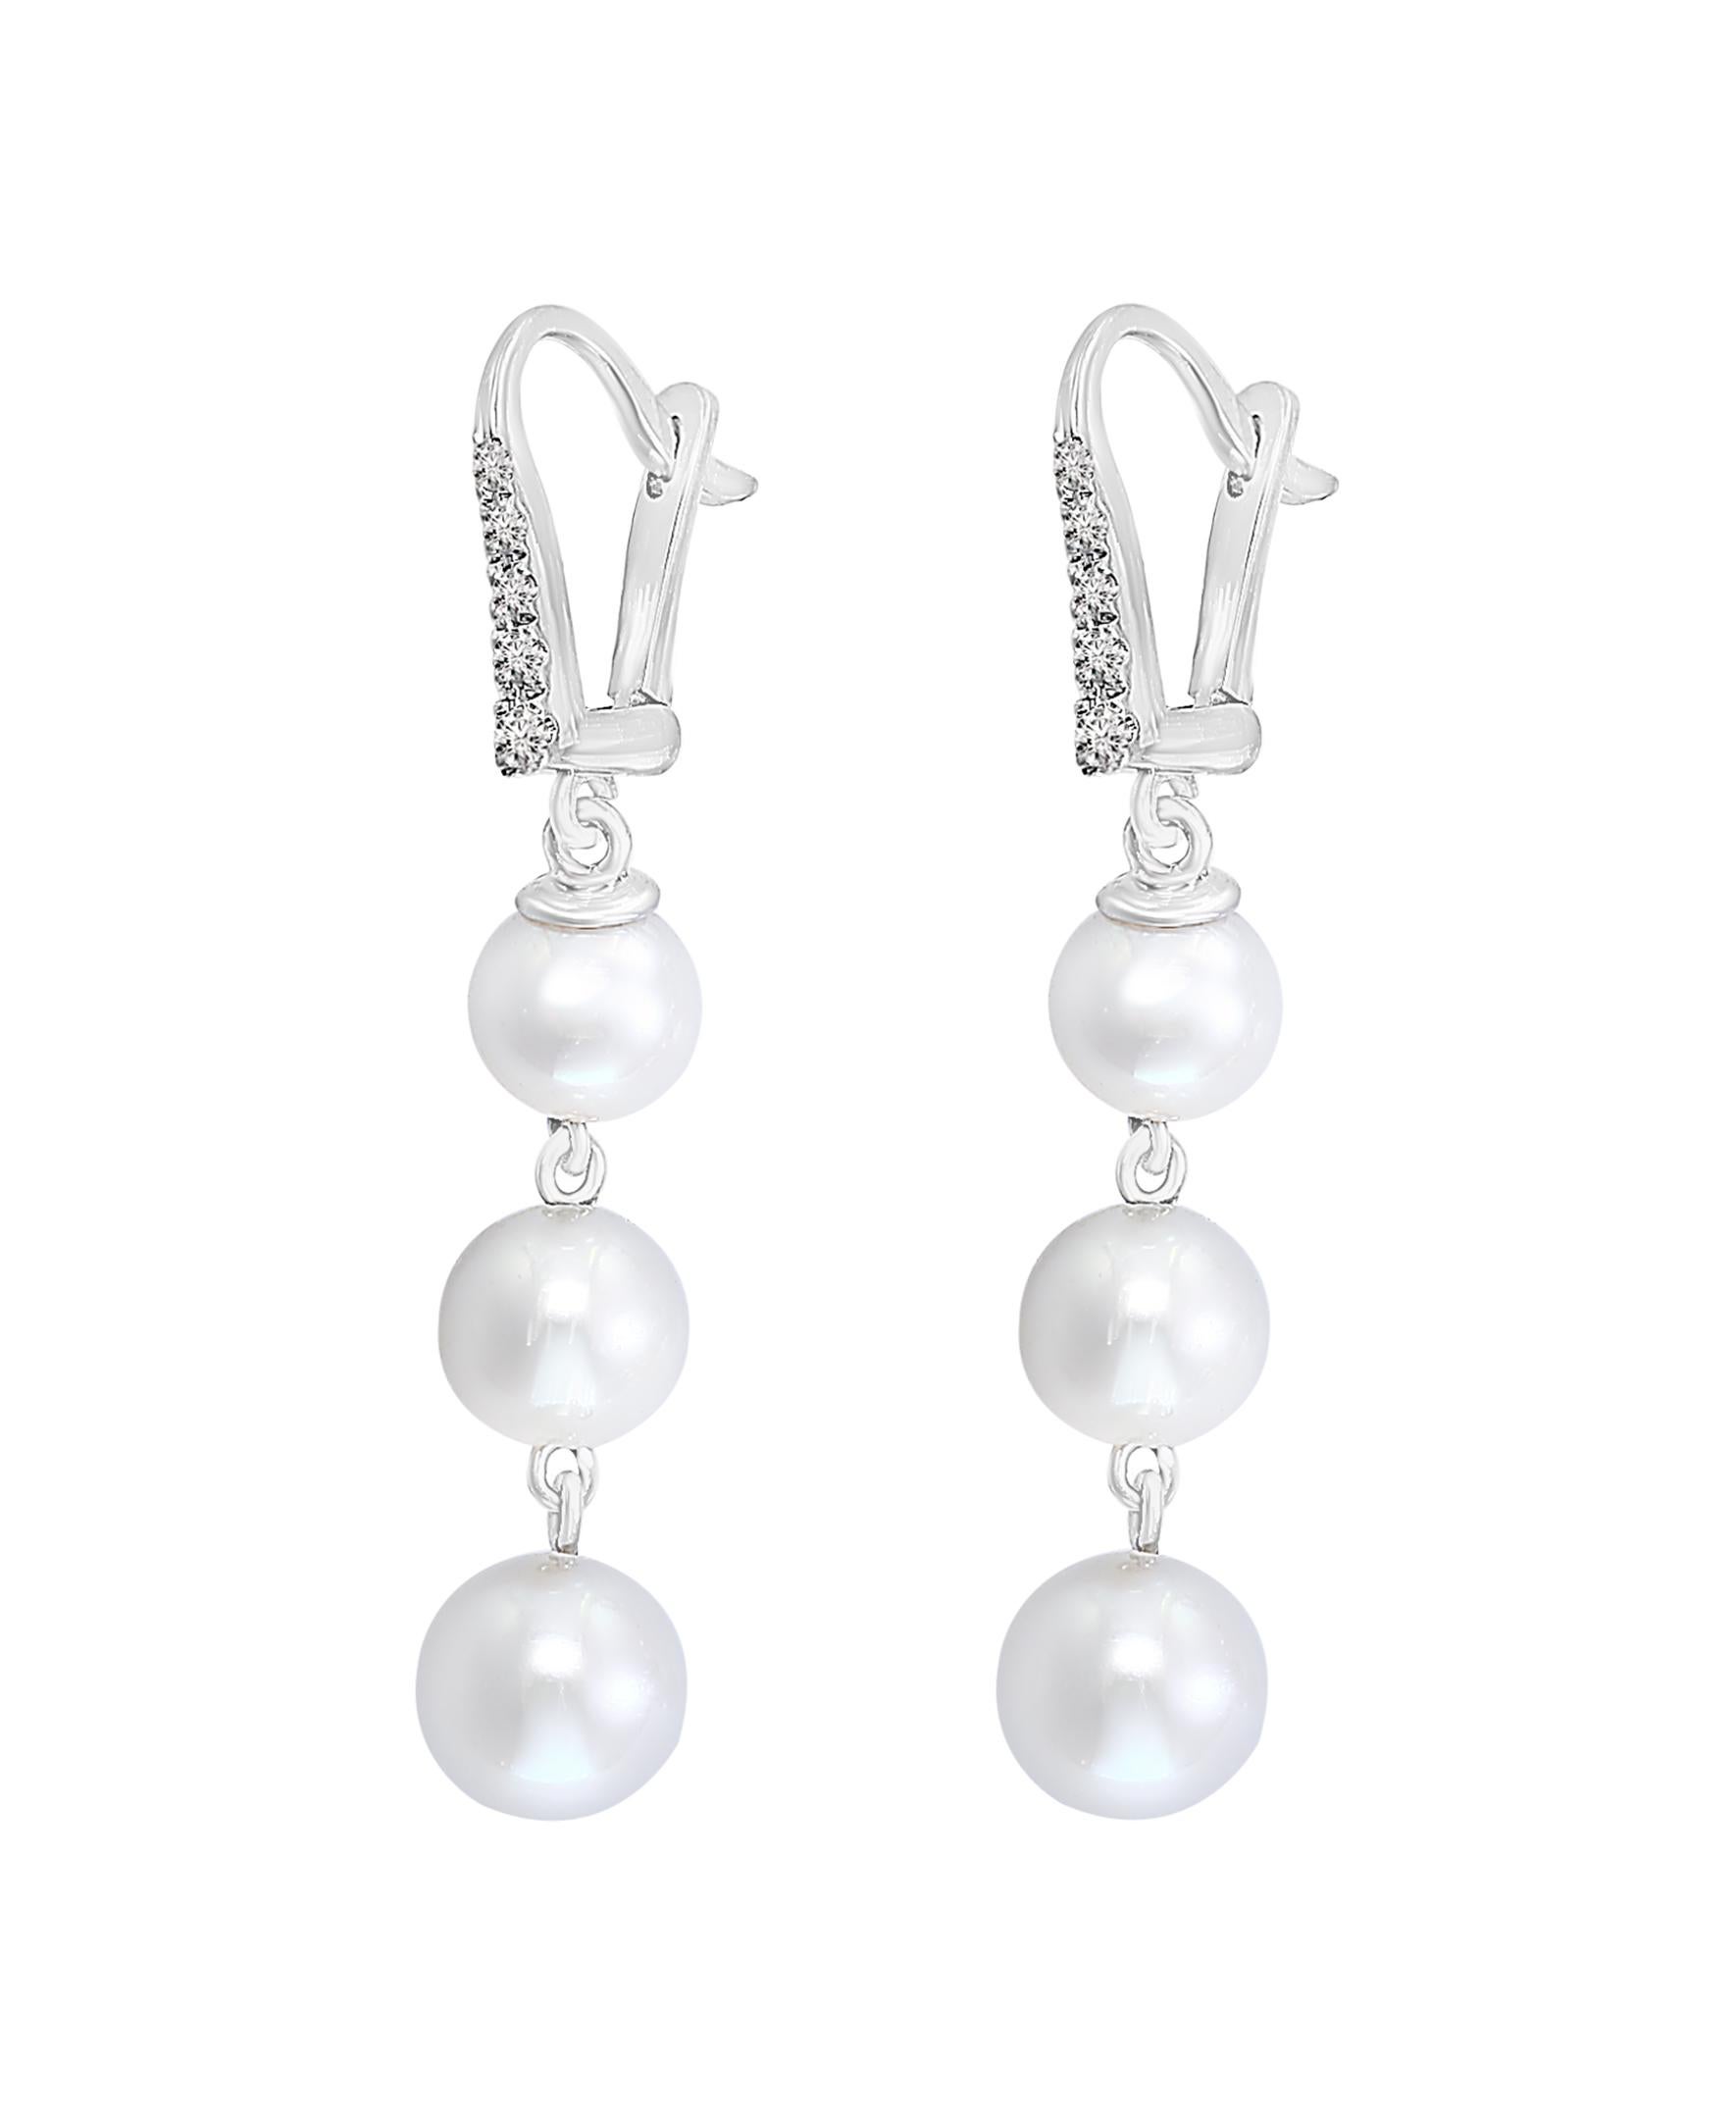 Contemporary Cultured Pearl and Diamond Dangle Earrings in 14 Karat White Gold